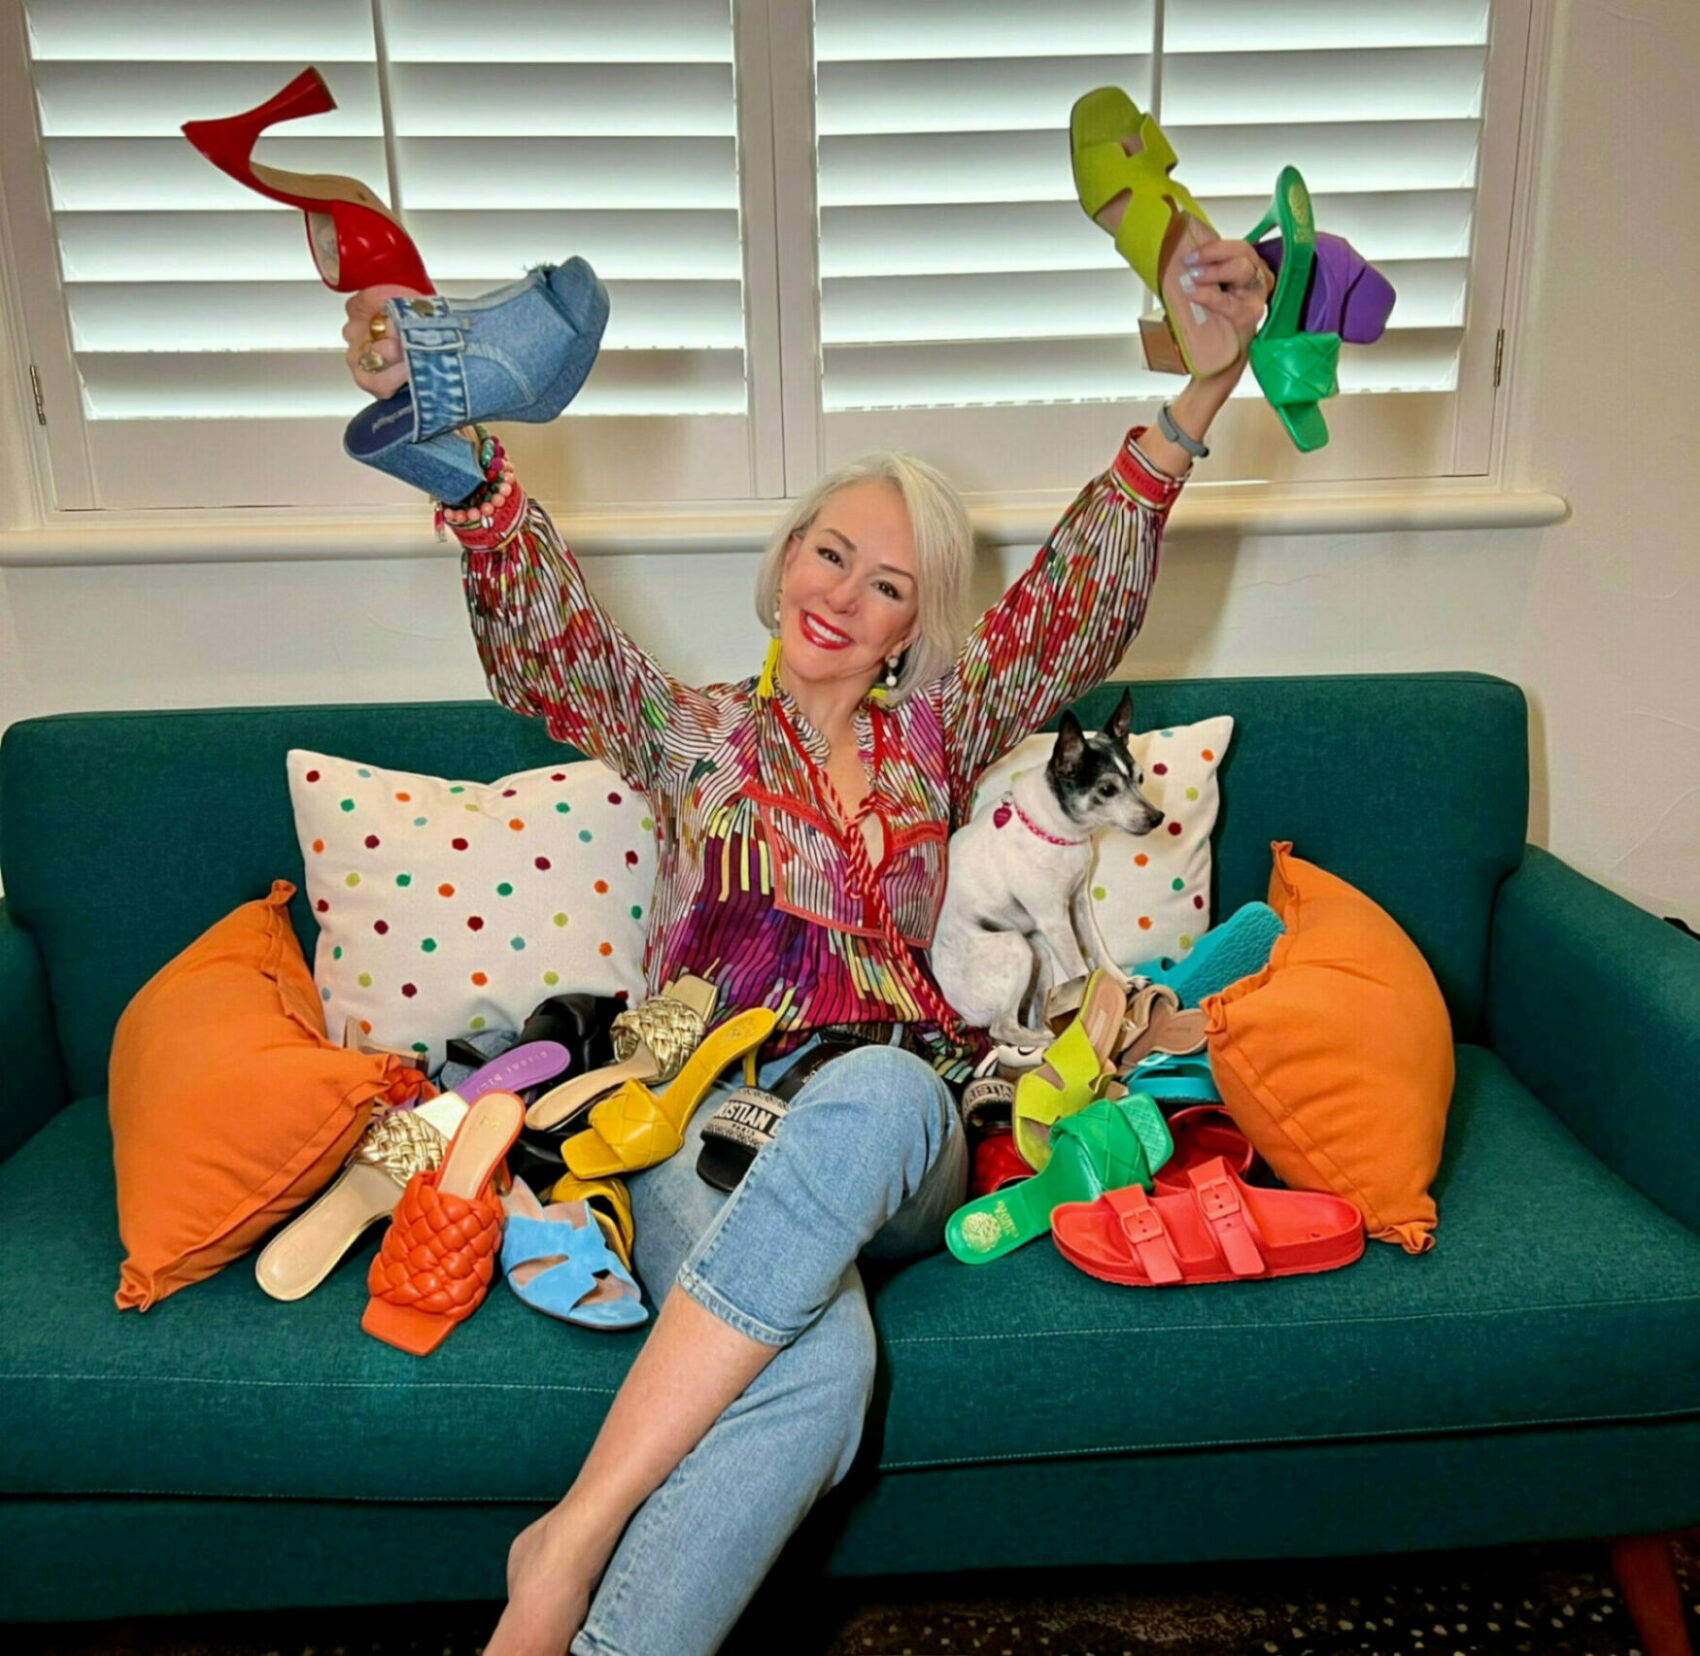 Sheree Frede with her dog on sofa with 12 pairs of colorful summer sandals